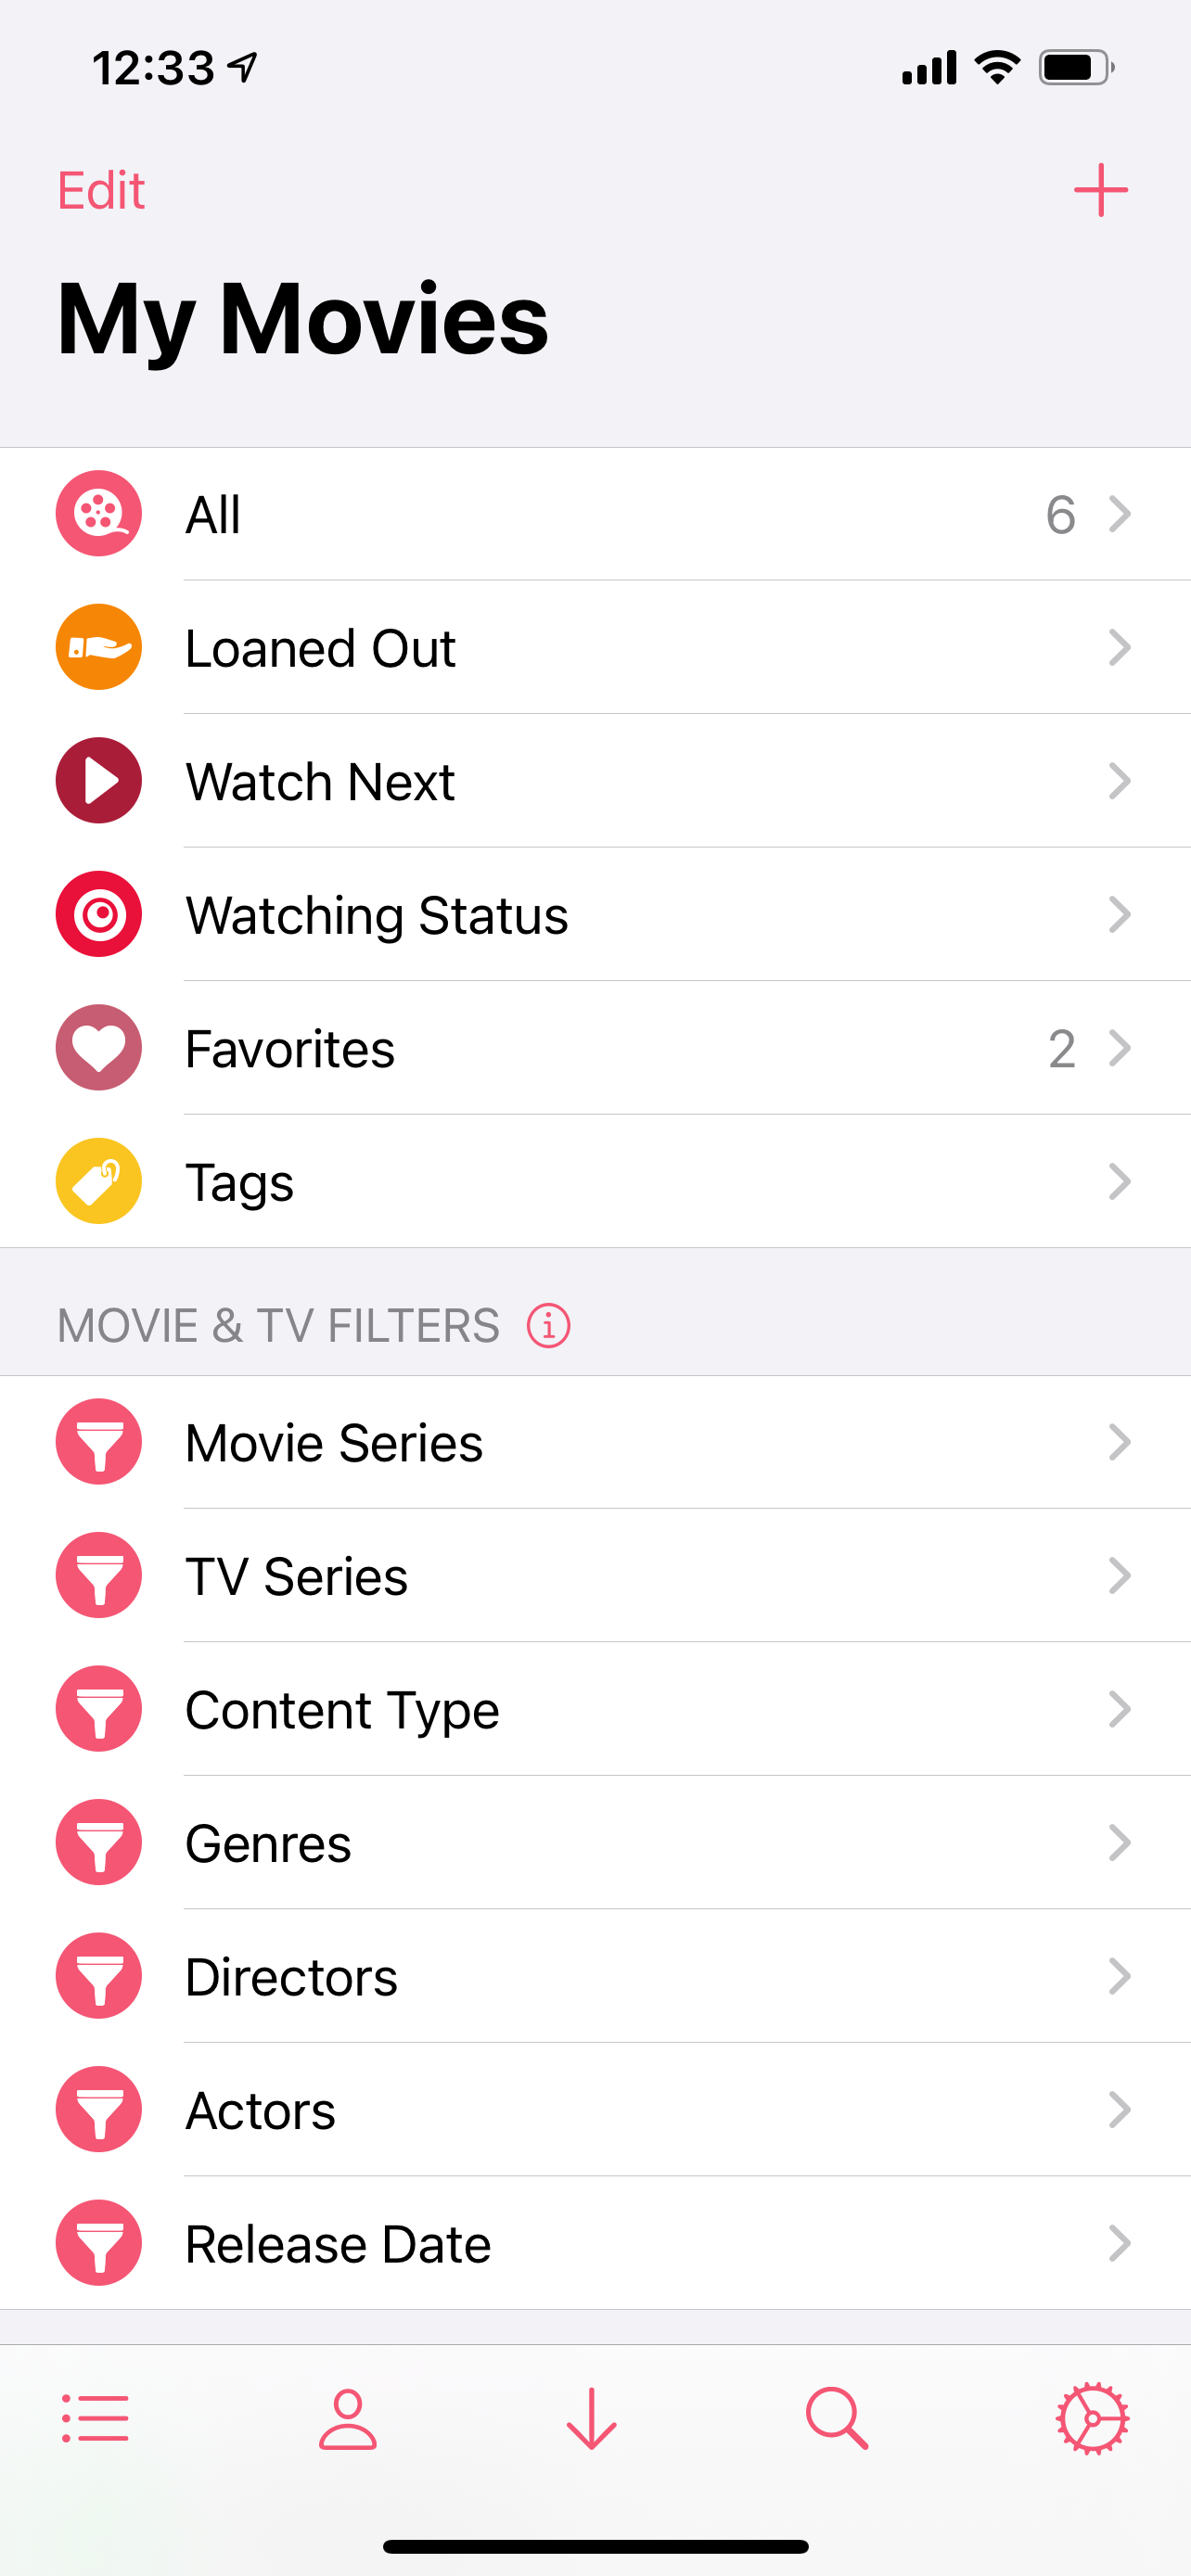 Lists in the MovieBuddy app